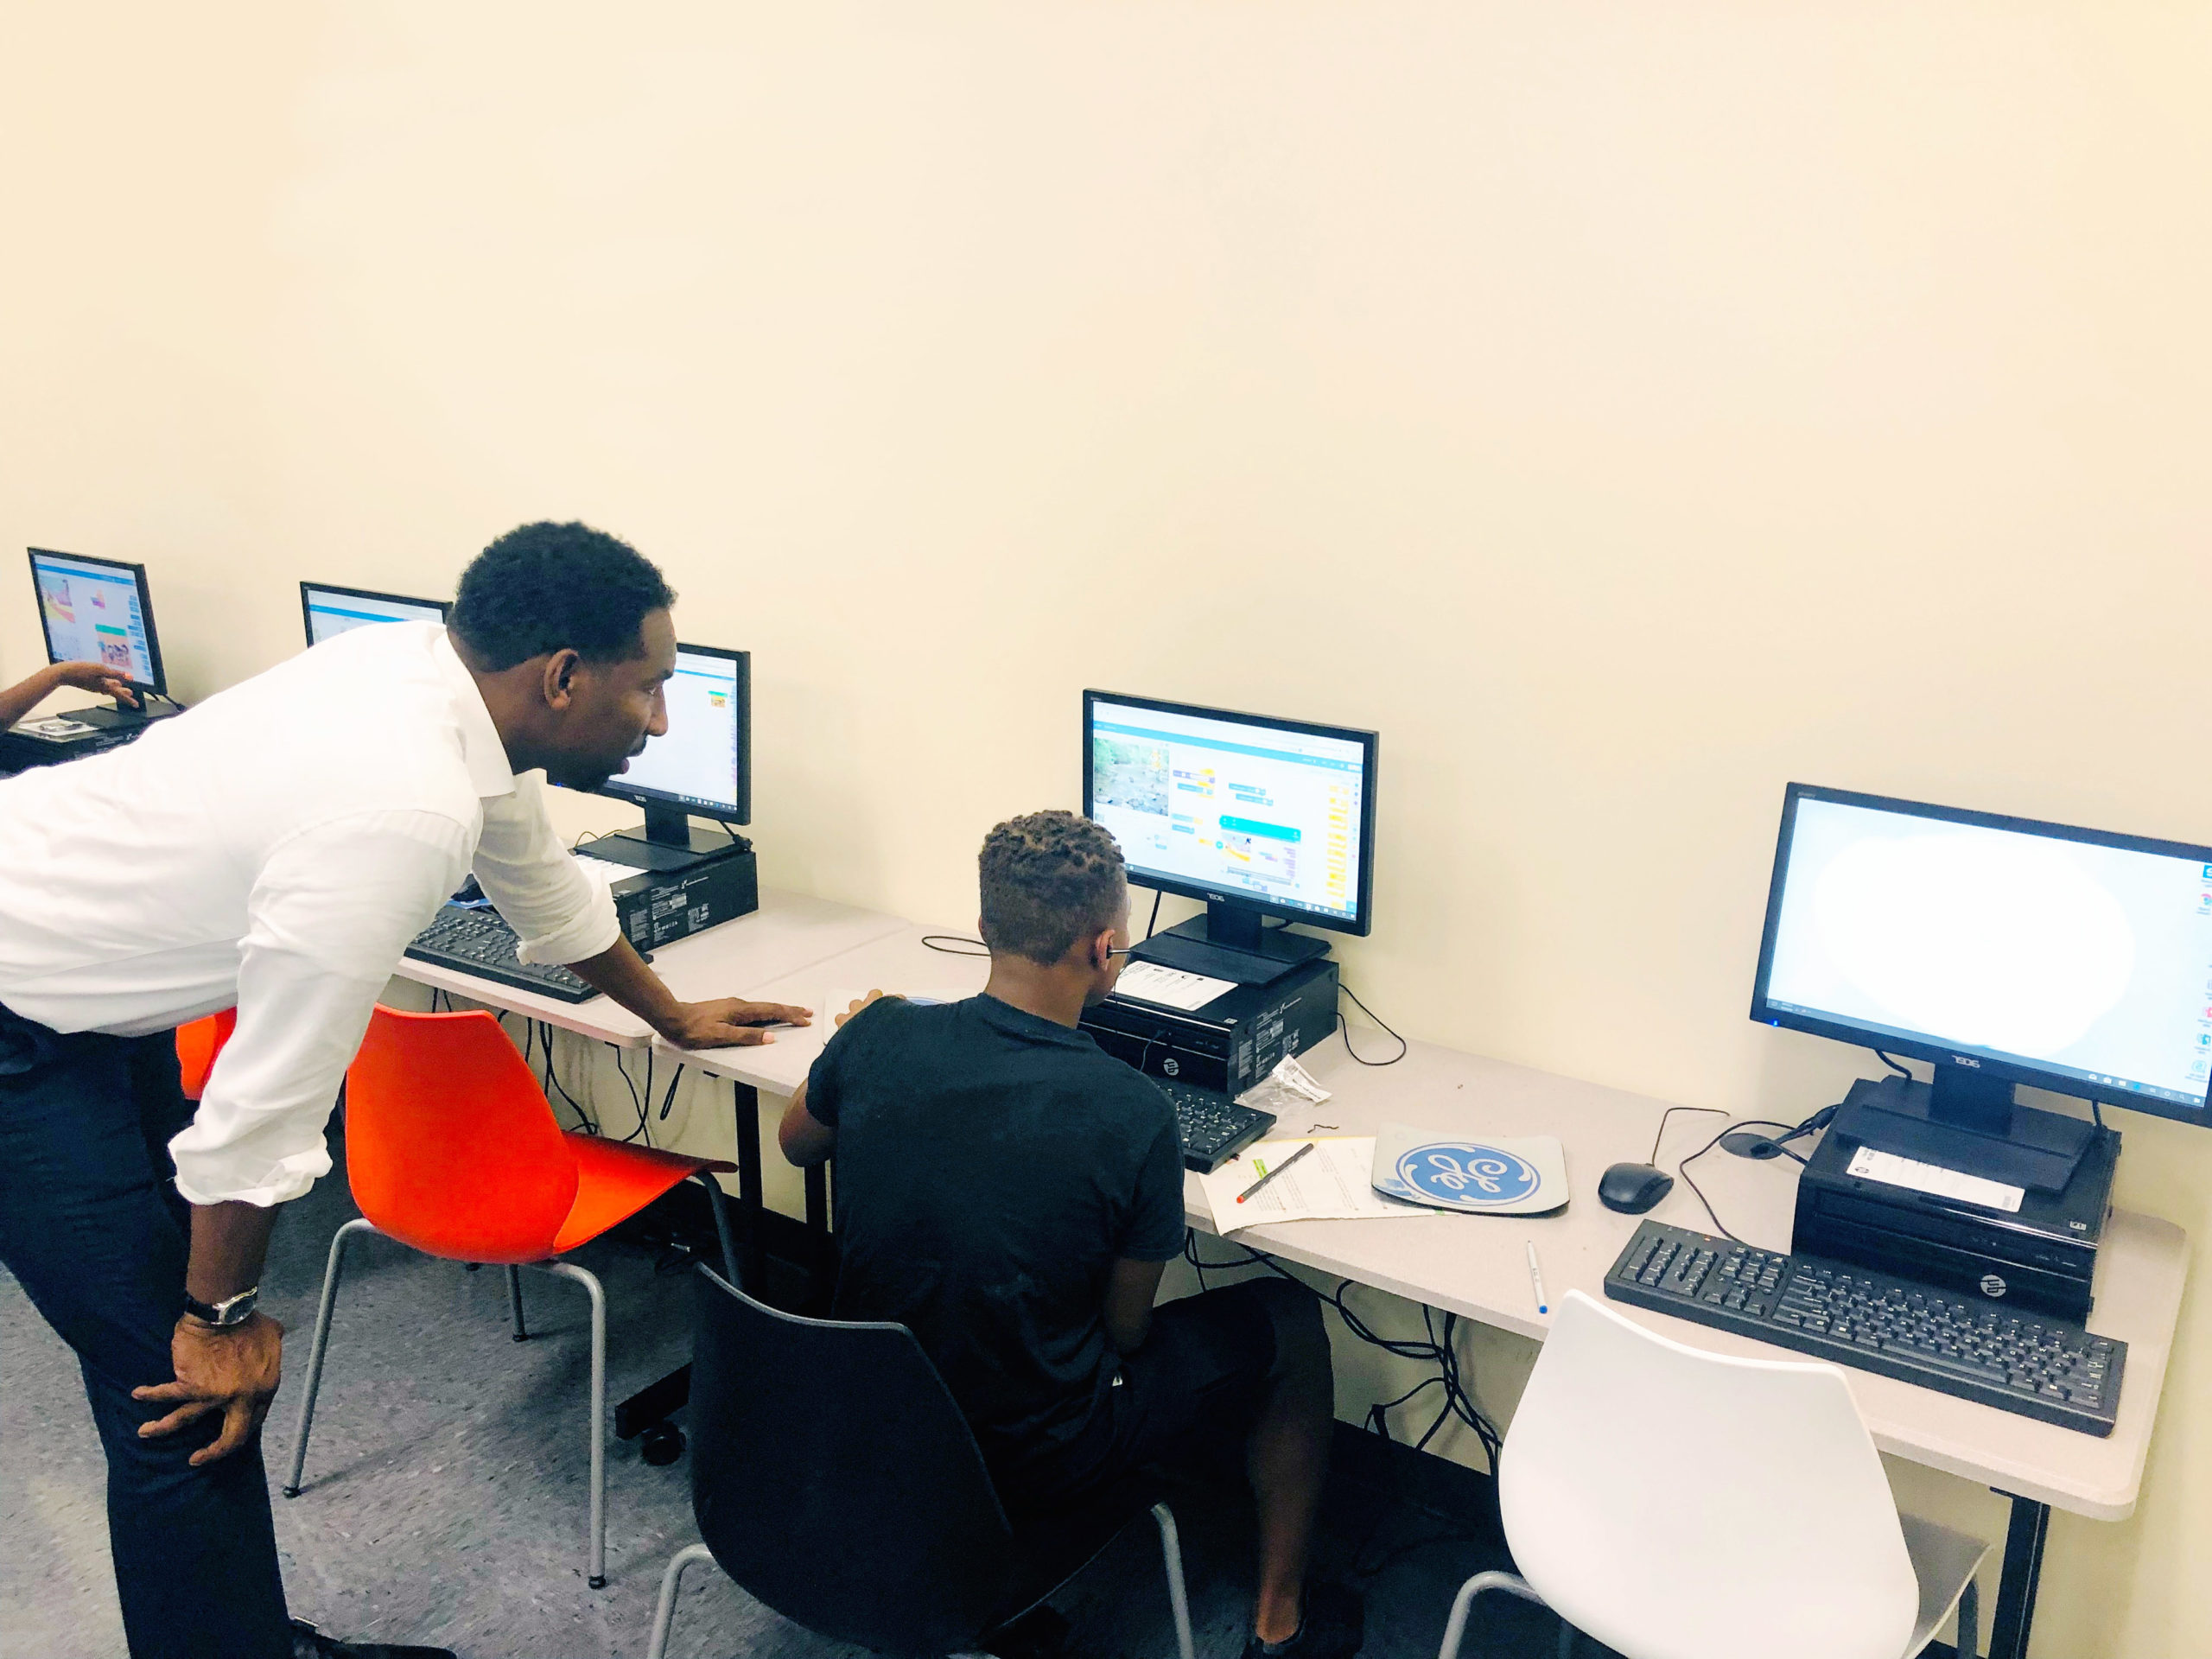 A young Black man & @Promise student is seated at a workstation. An instructor leans on the desk and looks over the student's shoulder. The instructor is a Black man of average build in his mid-thirties. He is wearing a white dress shirt with the sleeves rolled up.